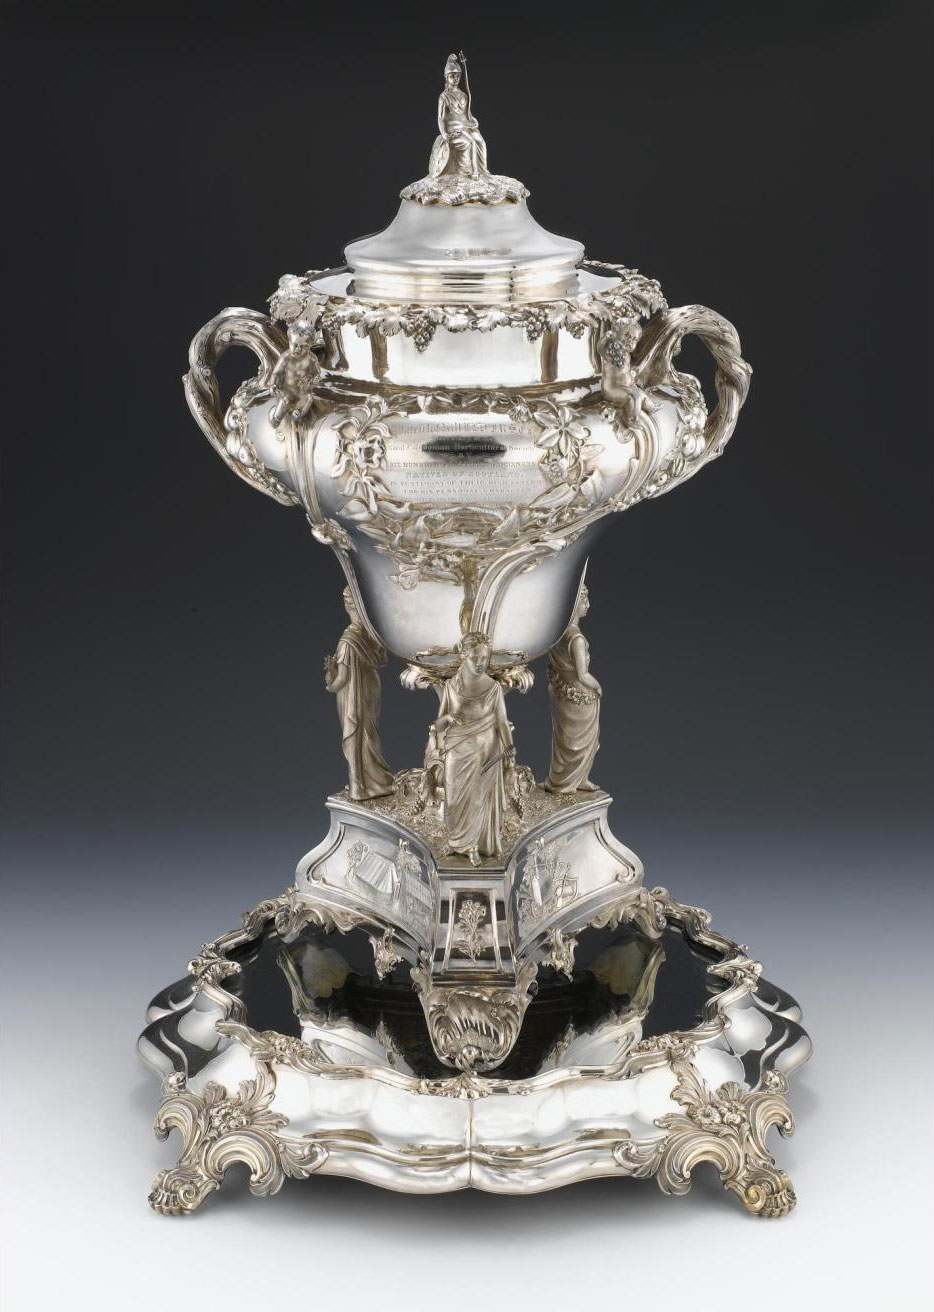 Neill cup, with a cover topped by a sculpture of Britannia. Made by Mackay, Cunningham and Co of Edinburgh, 1843-44. You can see this cup in the Silver Treasury in the National Museum of Scotland.